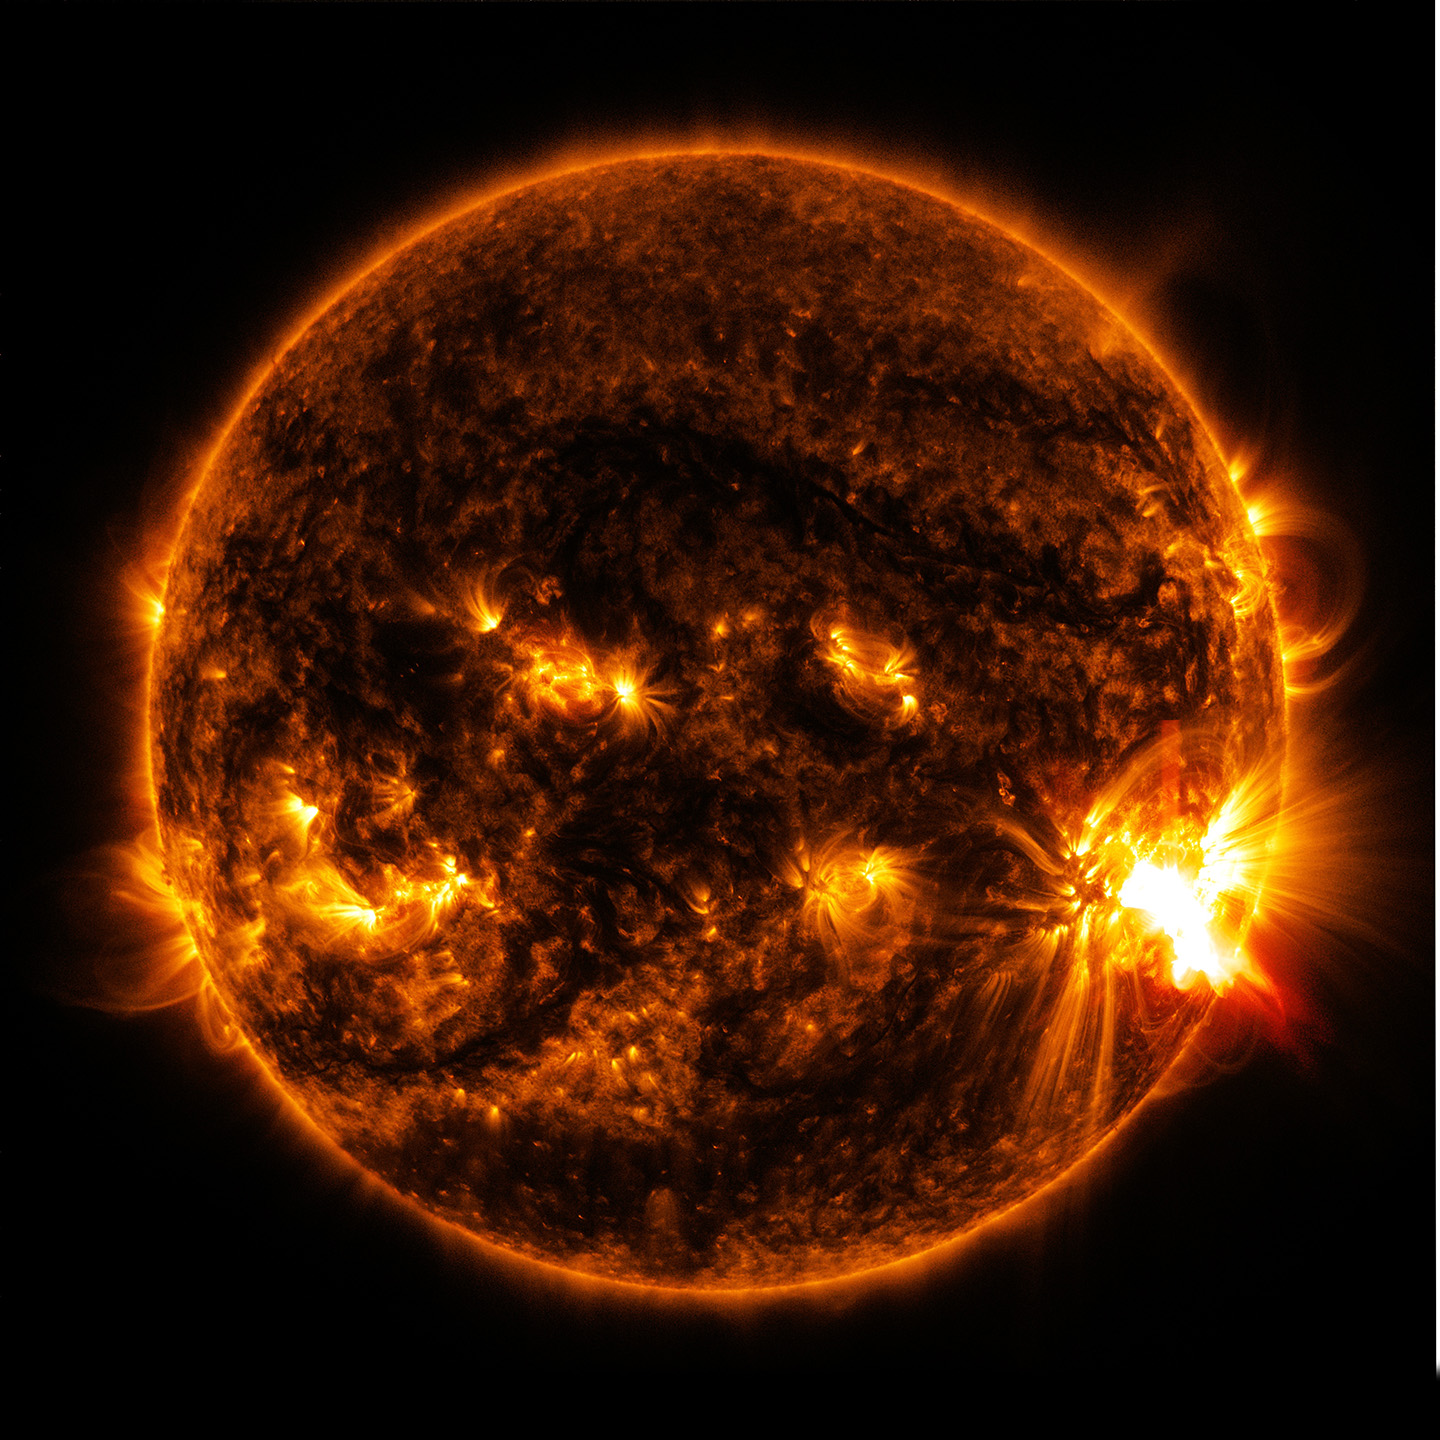 X2.0-class solar flare bursting off the lower right side of the Sun